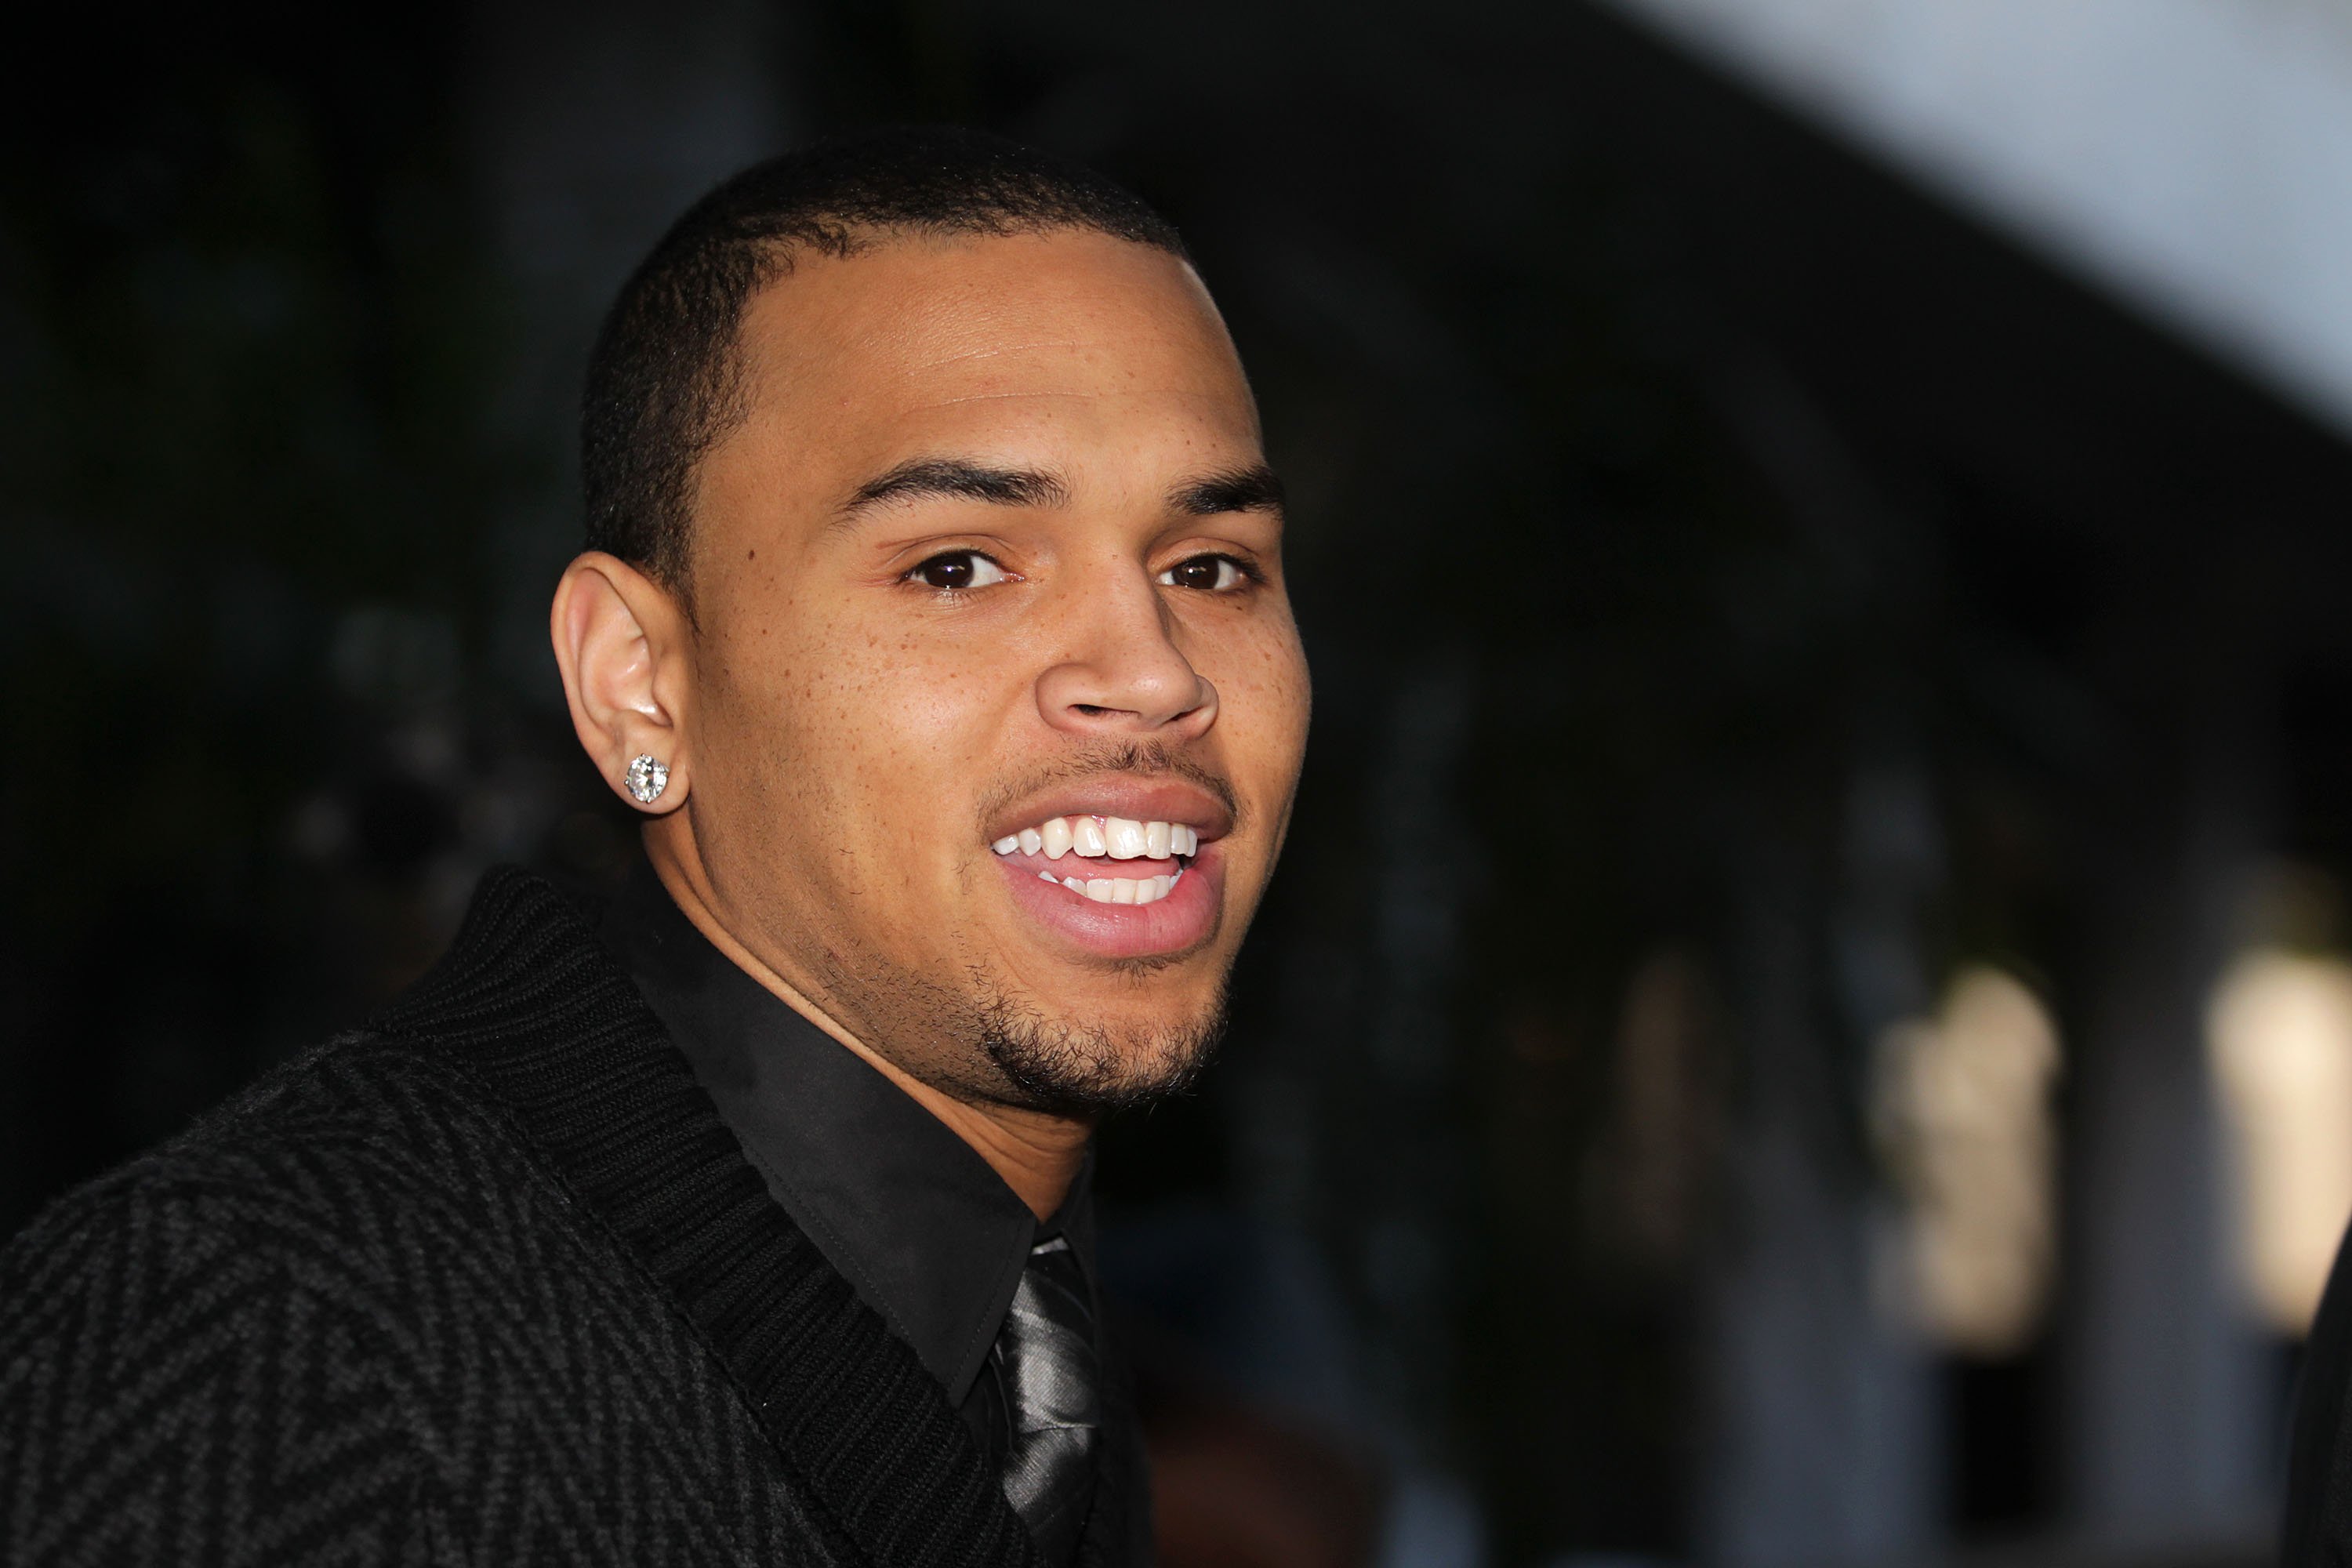 Chris Brown leaving the courthouse after a probation progress hearing in January 2011. | Photo: Getty Images